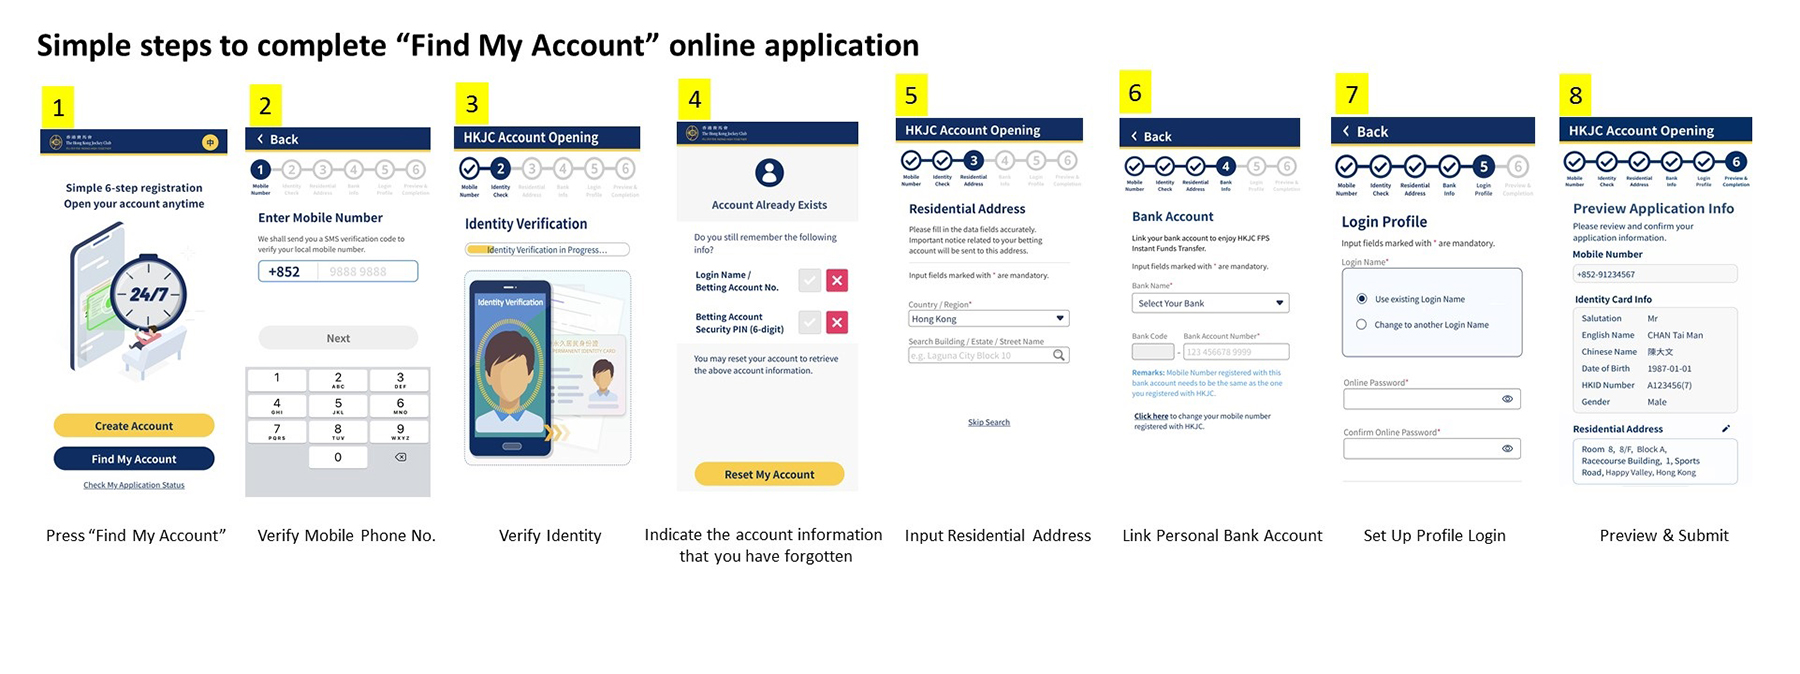 Simple steps to complete “Find My Account” online application